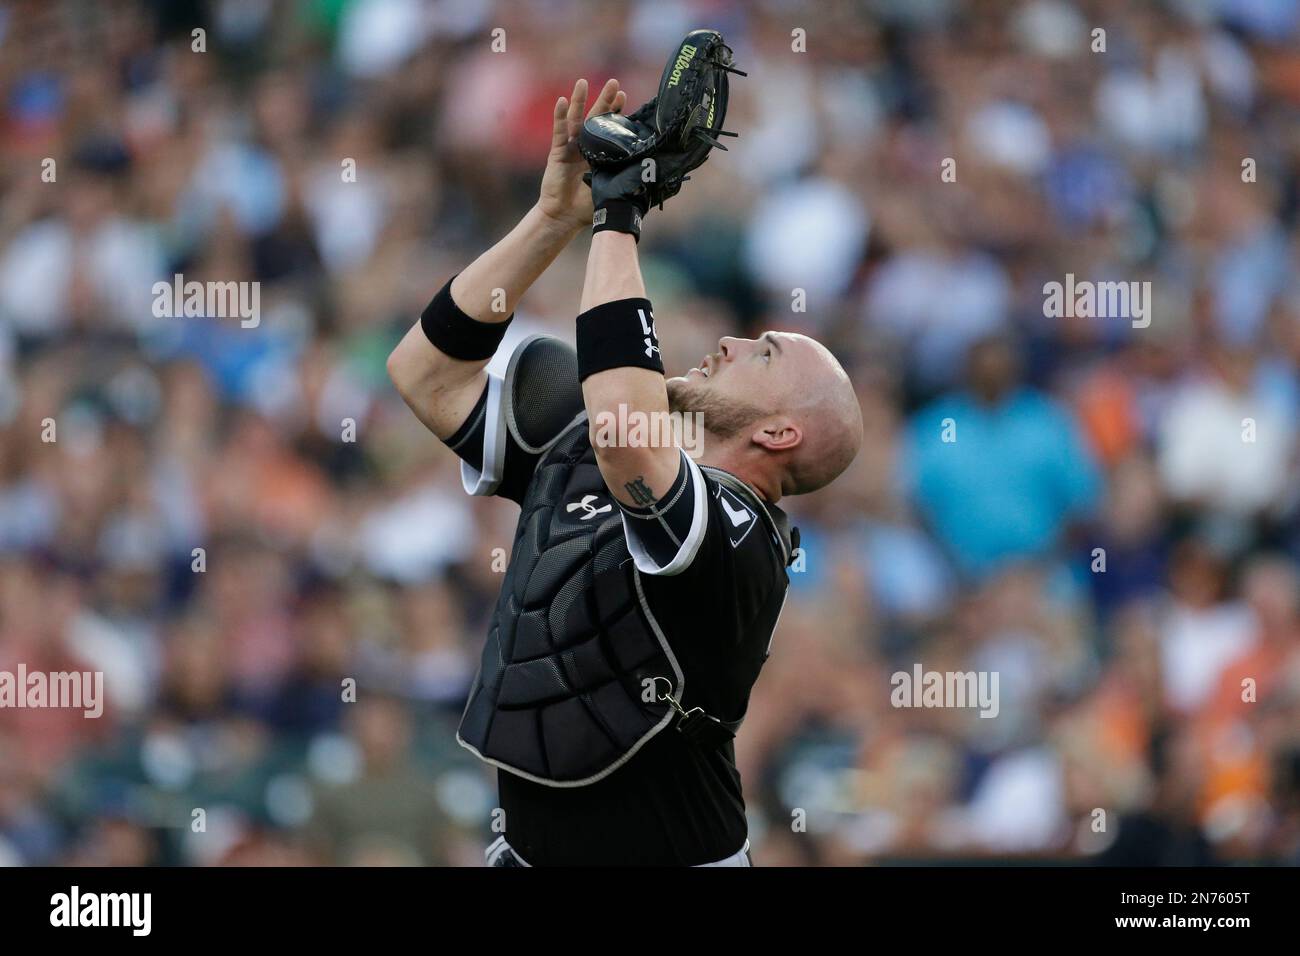 Chicago White Sox catcher Tyler Flowers catches the pop-up from